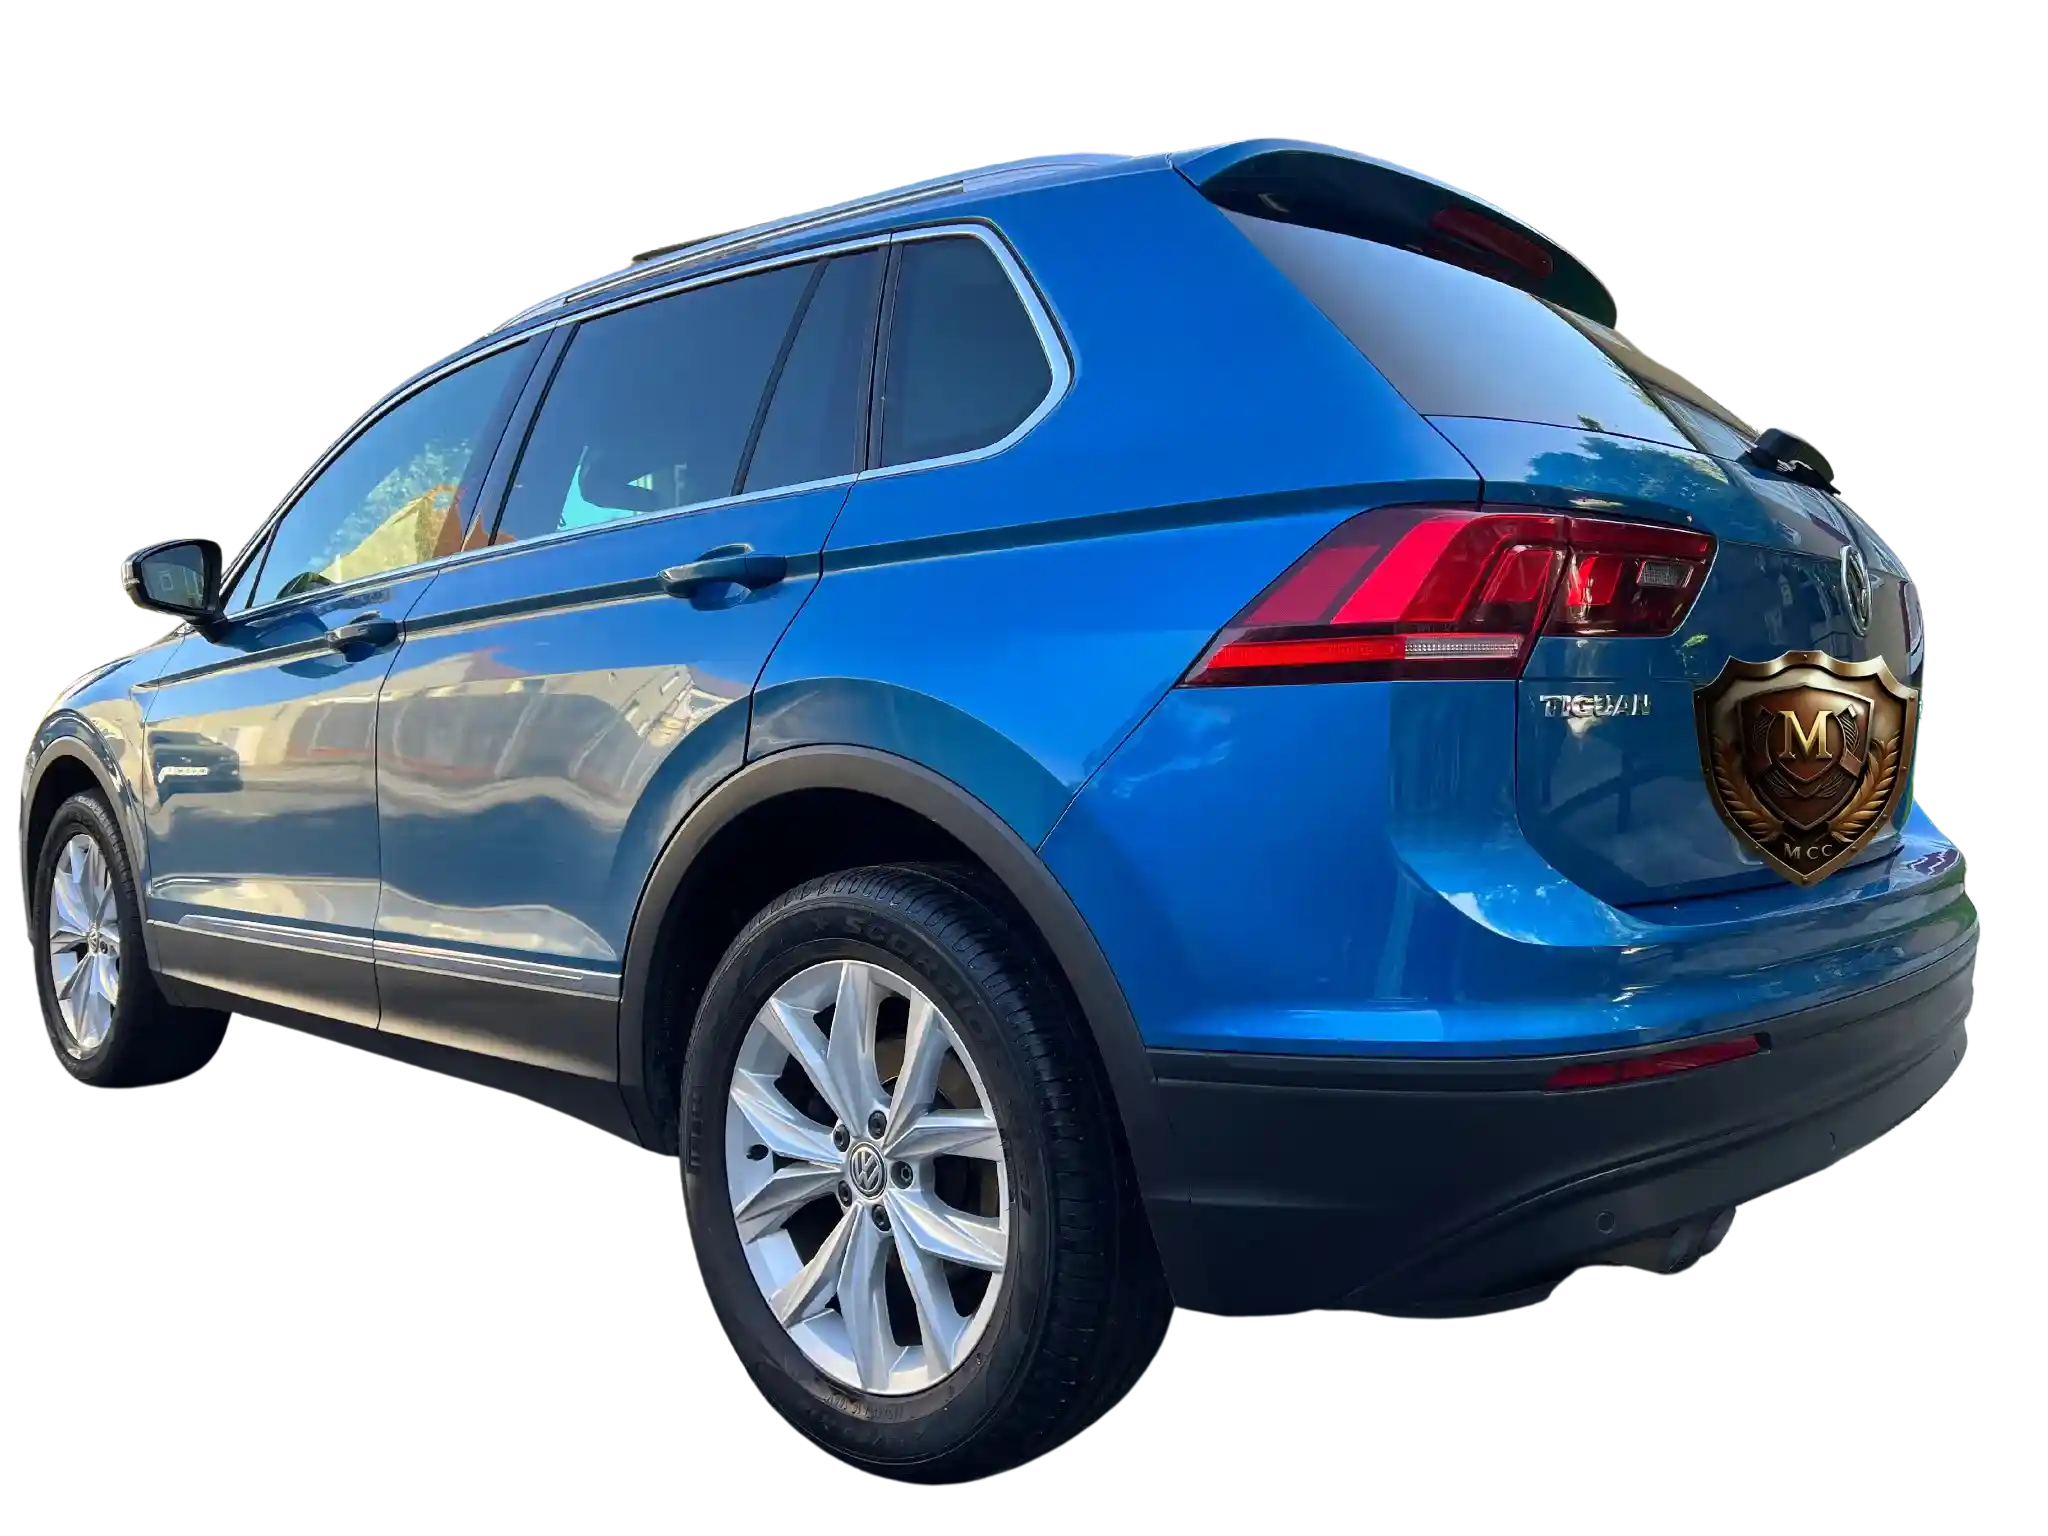 Eco-friendly waterless valeting of a Volkswagen Tiguan 4Motion in Esher, enhancing its rugged elegance and reflecting corporate environmental values.